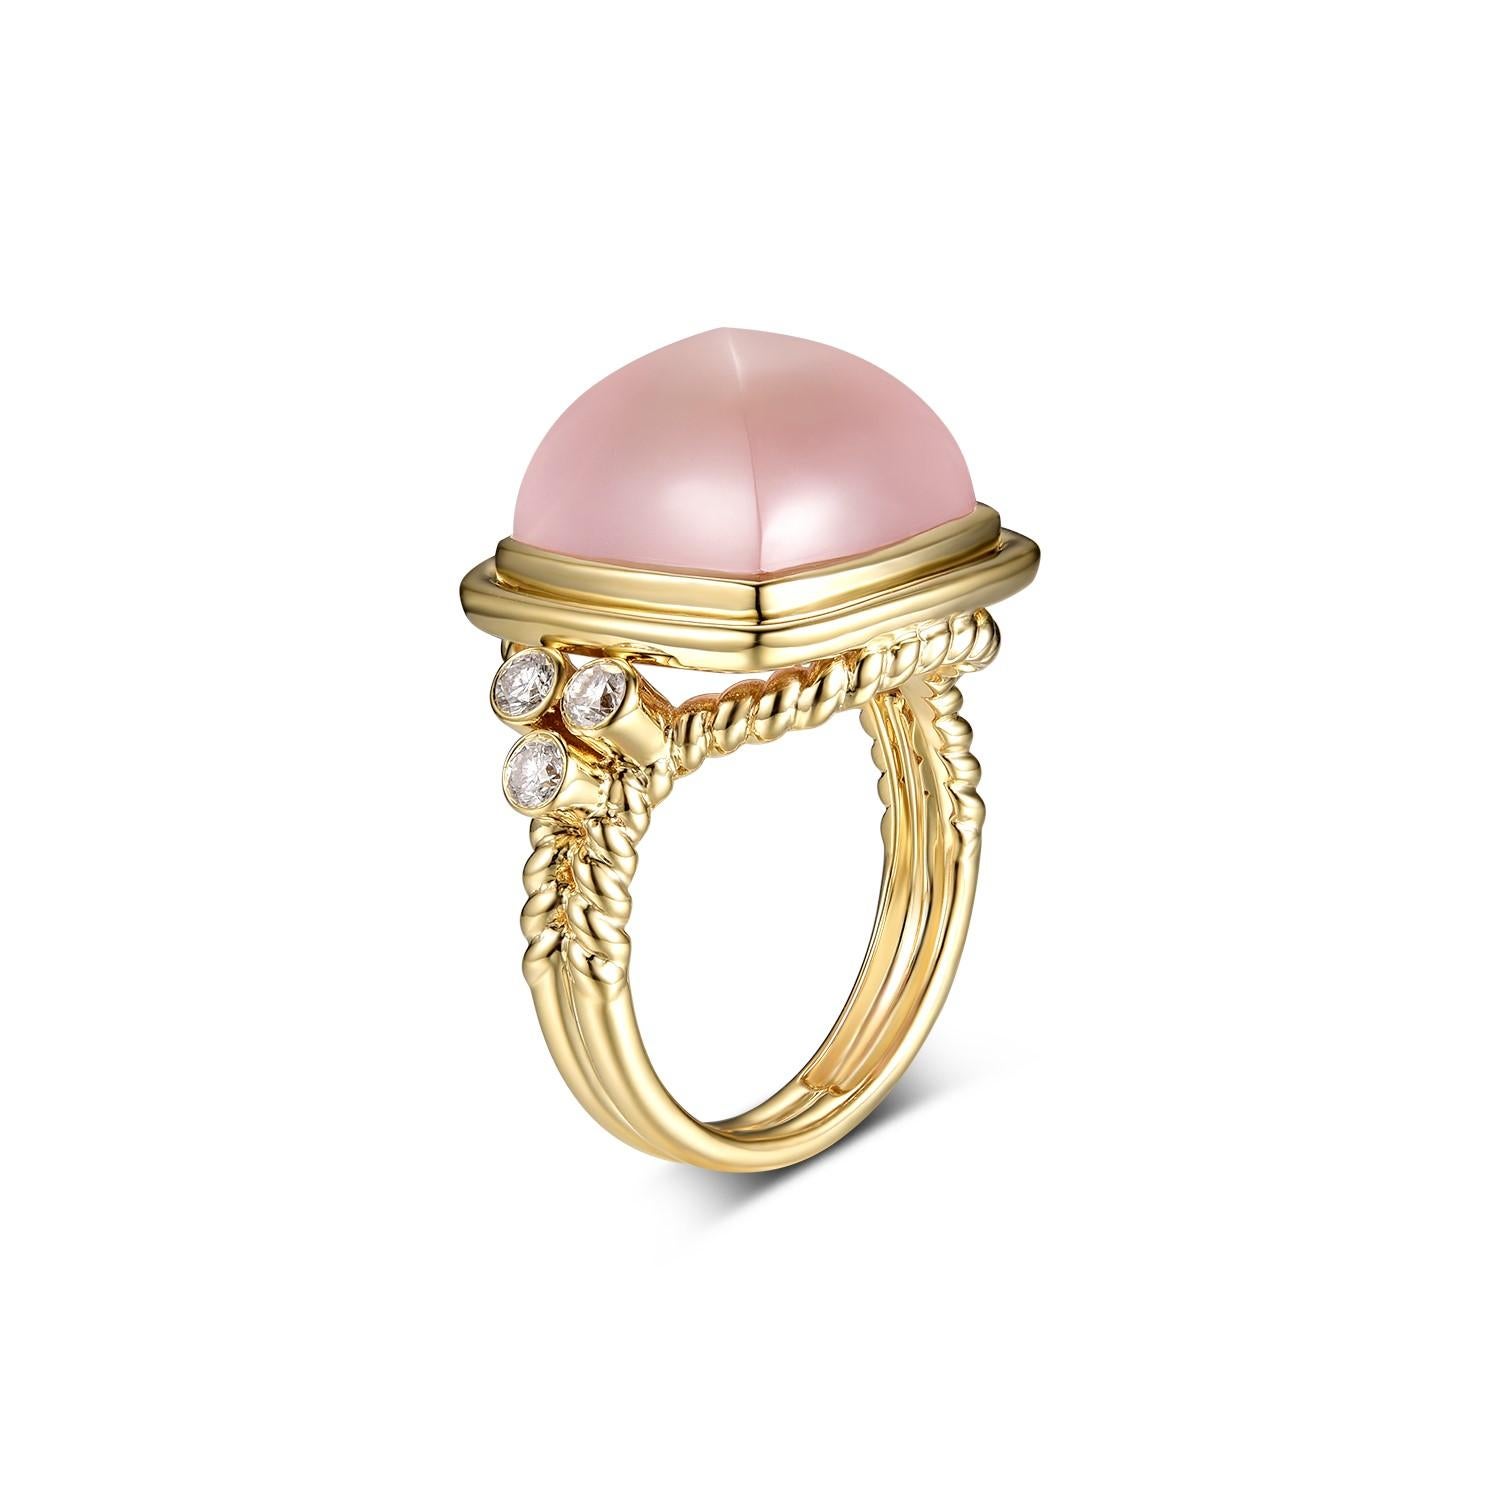 This cocktail ring feature a 9.33 carat sugarloaf rose quartz, assented with 0.26 carat of diamonds on the ring.  Ring is made with 18 karat yellow gold.  Matching earrings are available, please visit our storefront or send a private message to